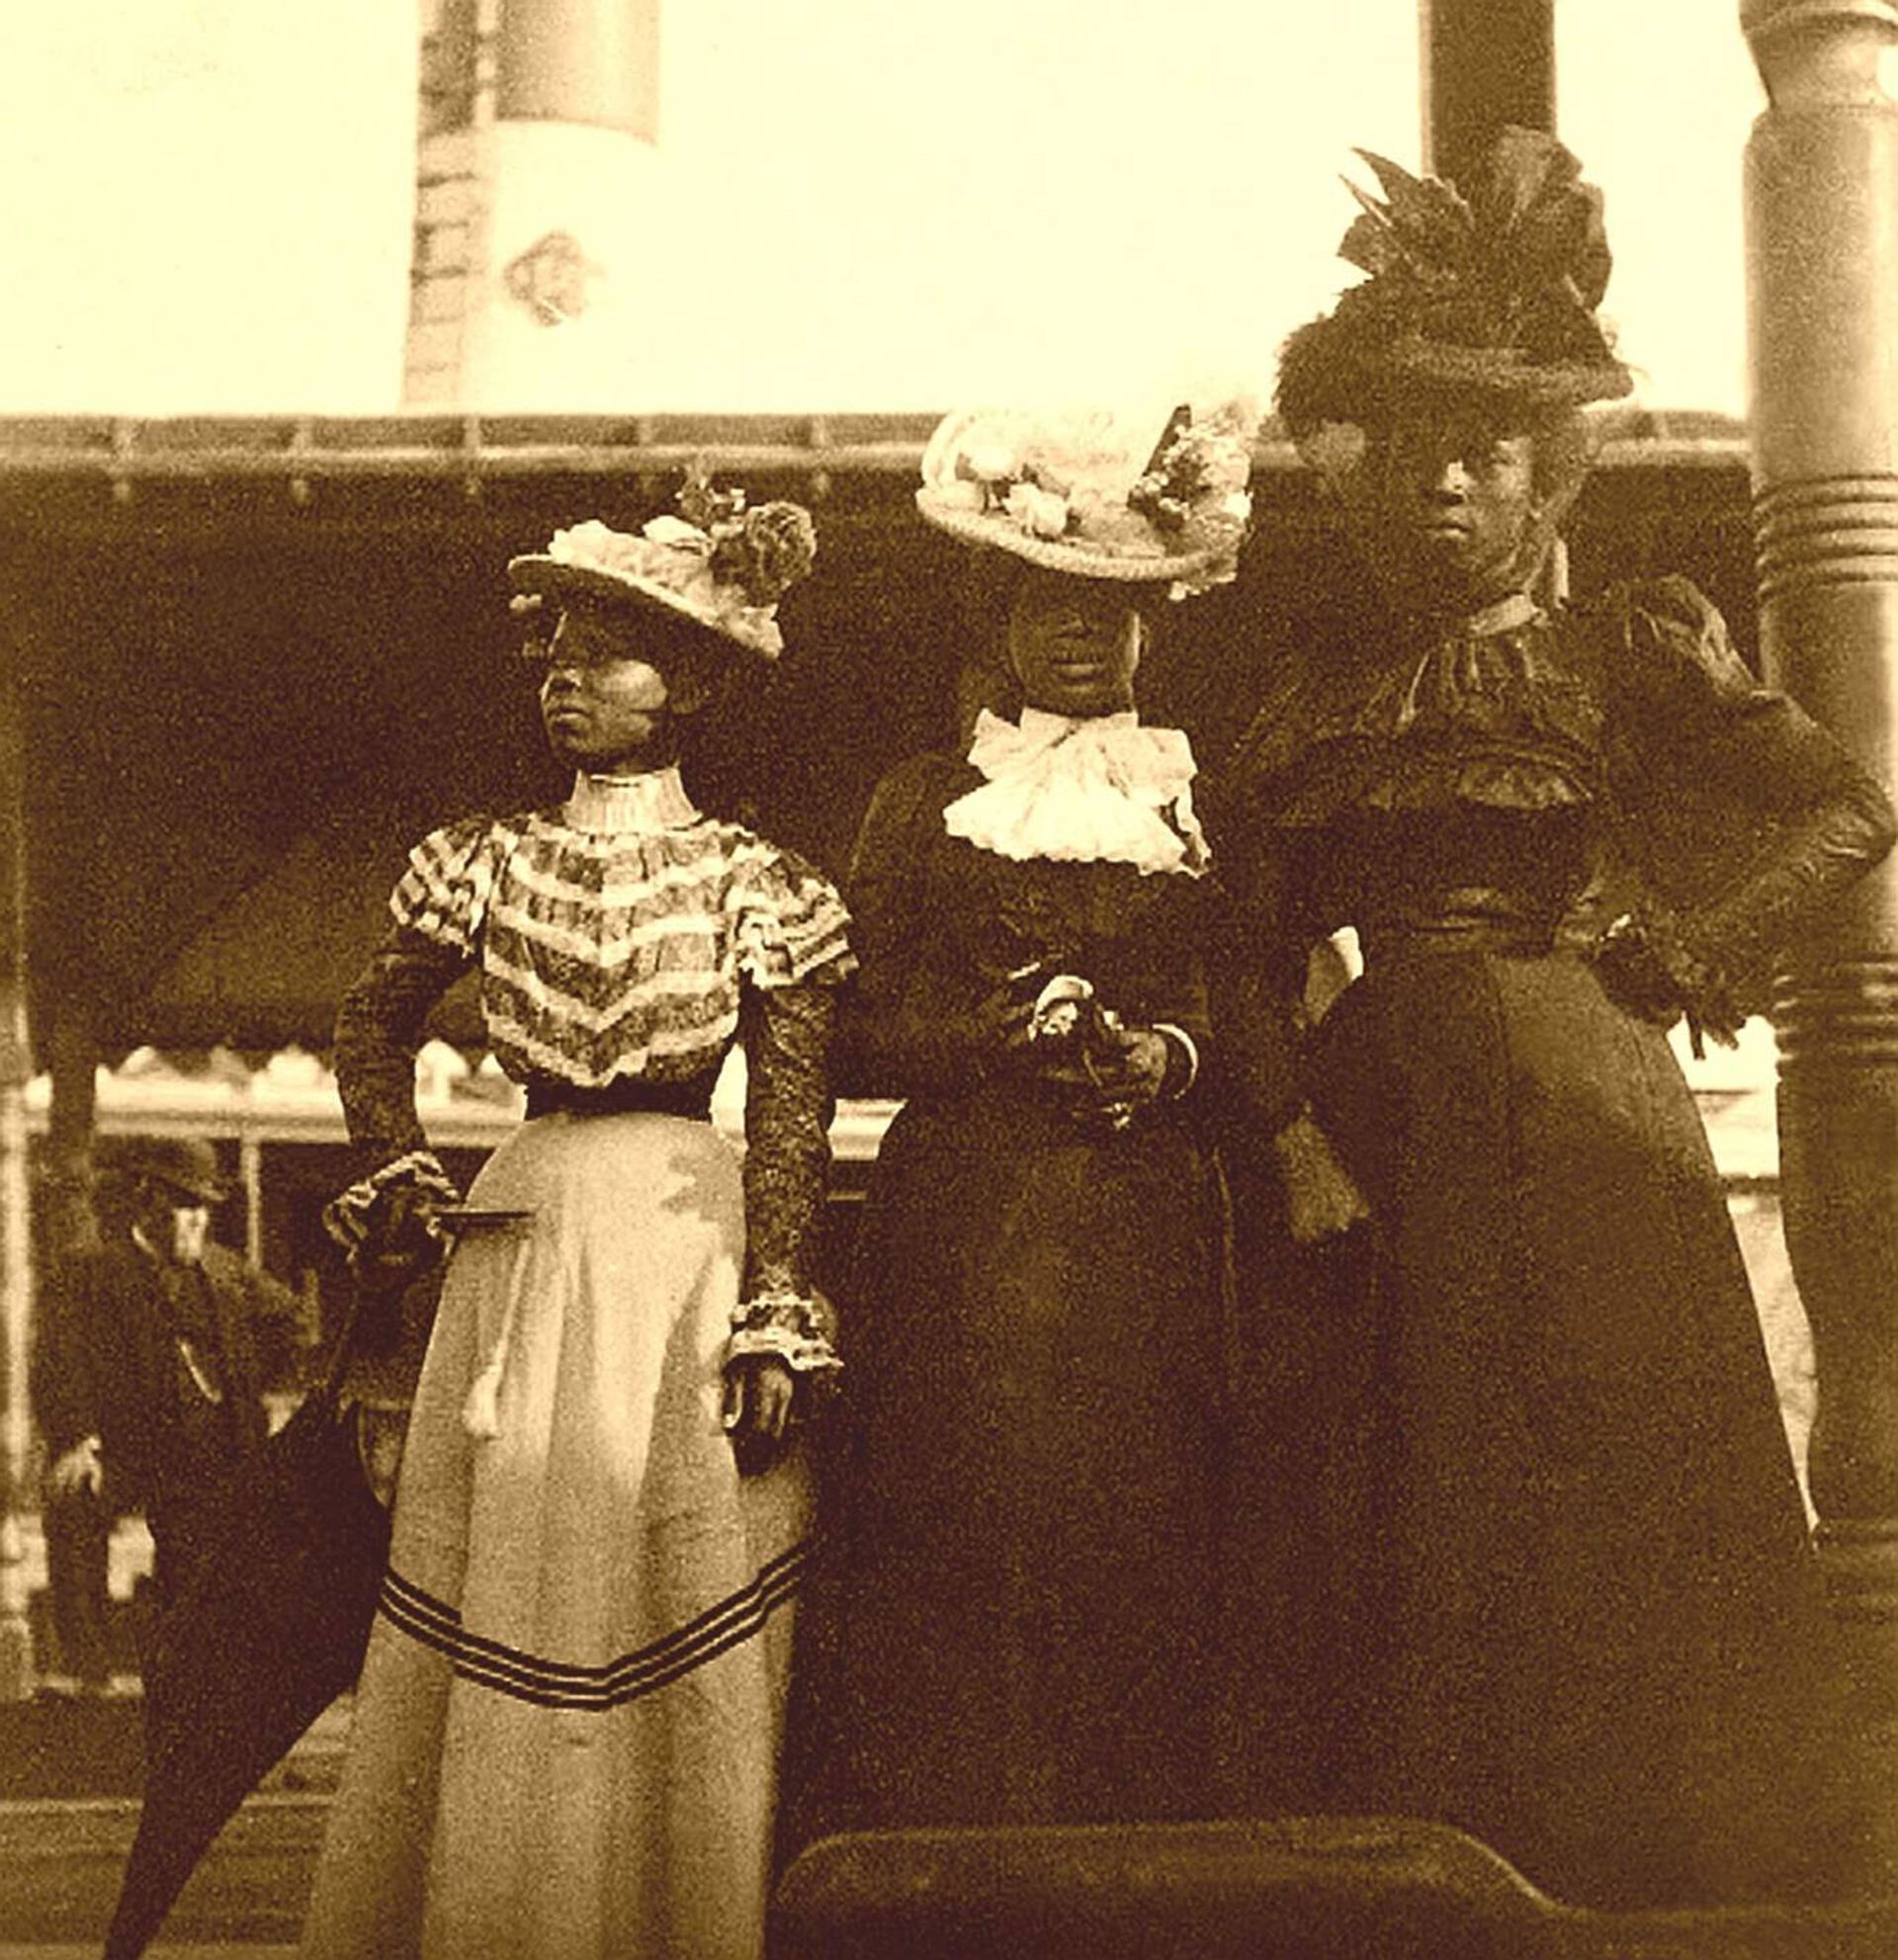 A Short History of African Americans at the Minnesota State Fair